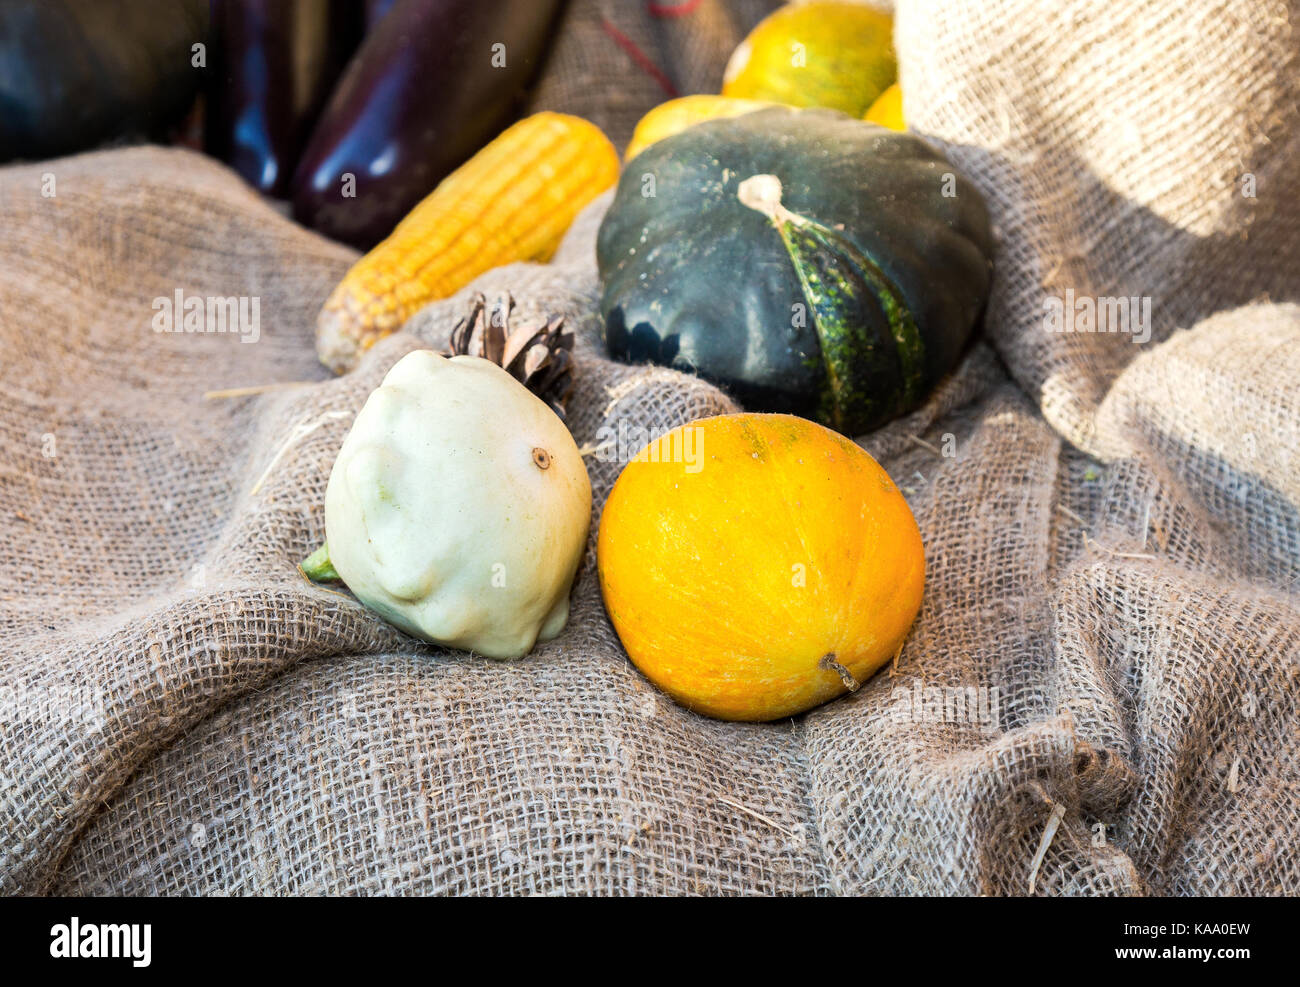 Agriculture harvested various fresh vegetables on the coarse linen cloth Stock Photo